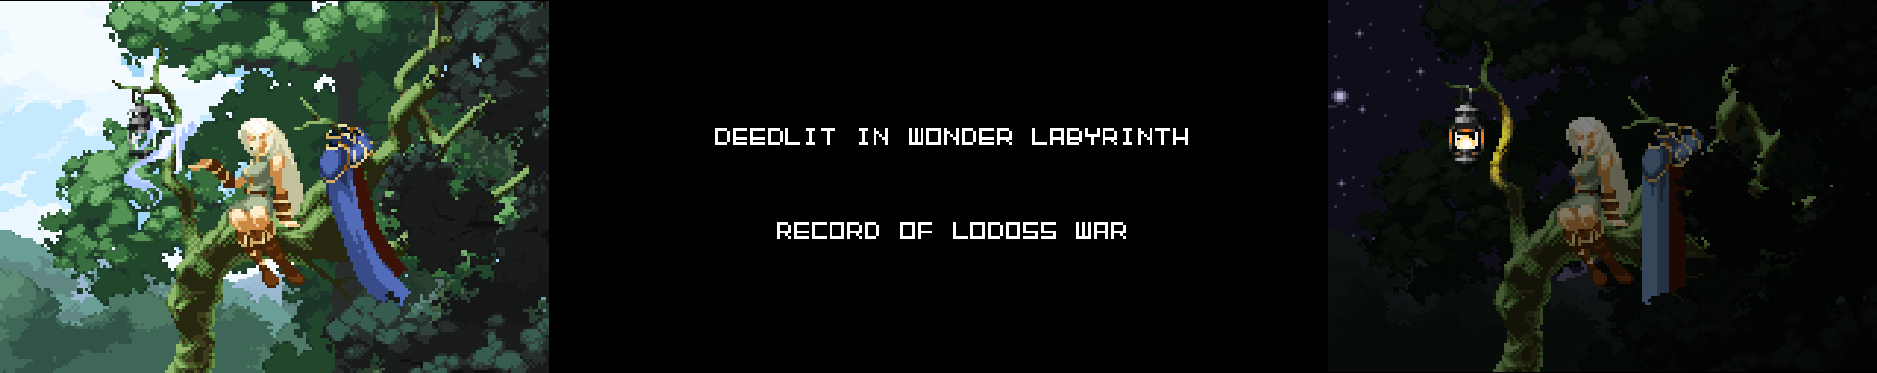 Record of Lodoss War-Deedlit in Wonder Labyrinth- - DiWL 100% Map/Guide/Tips/Drops